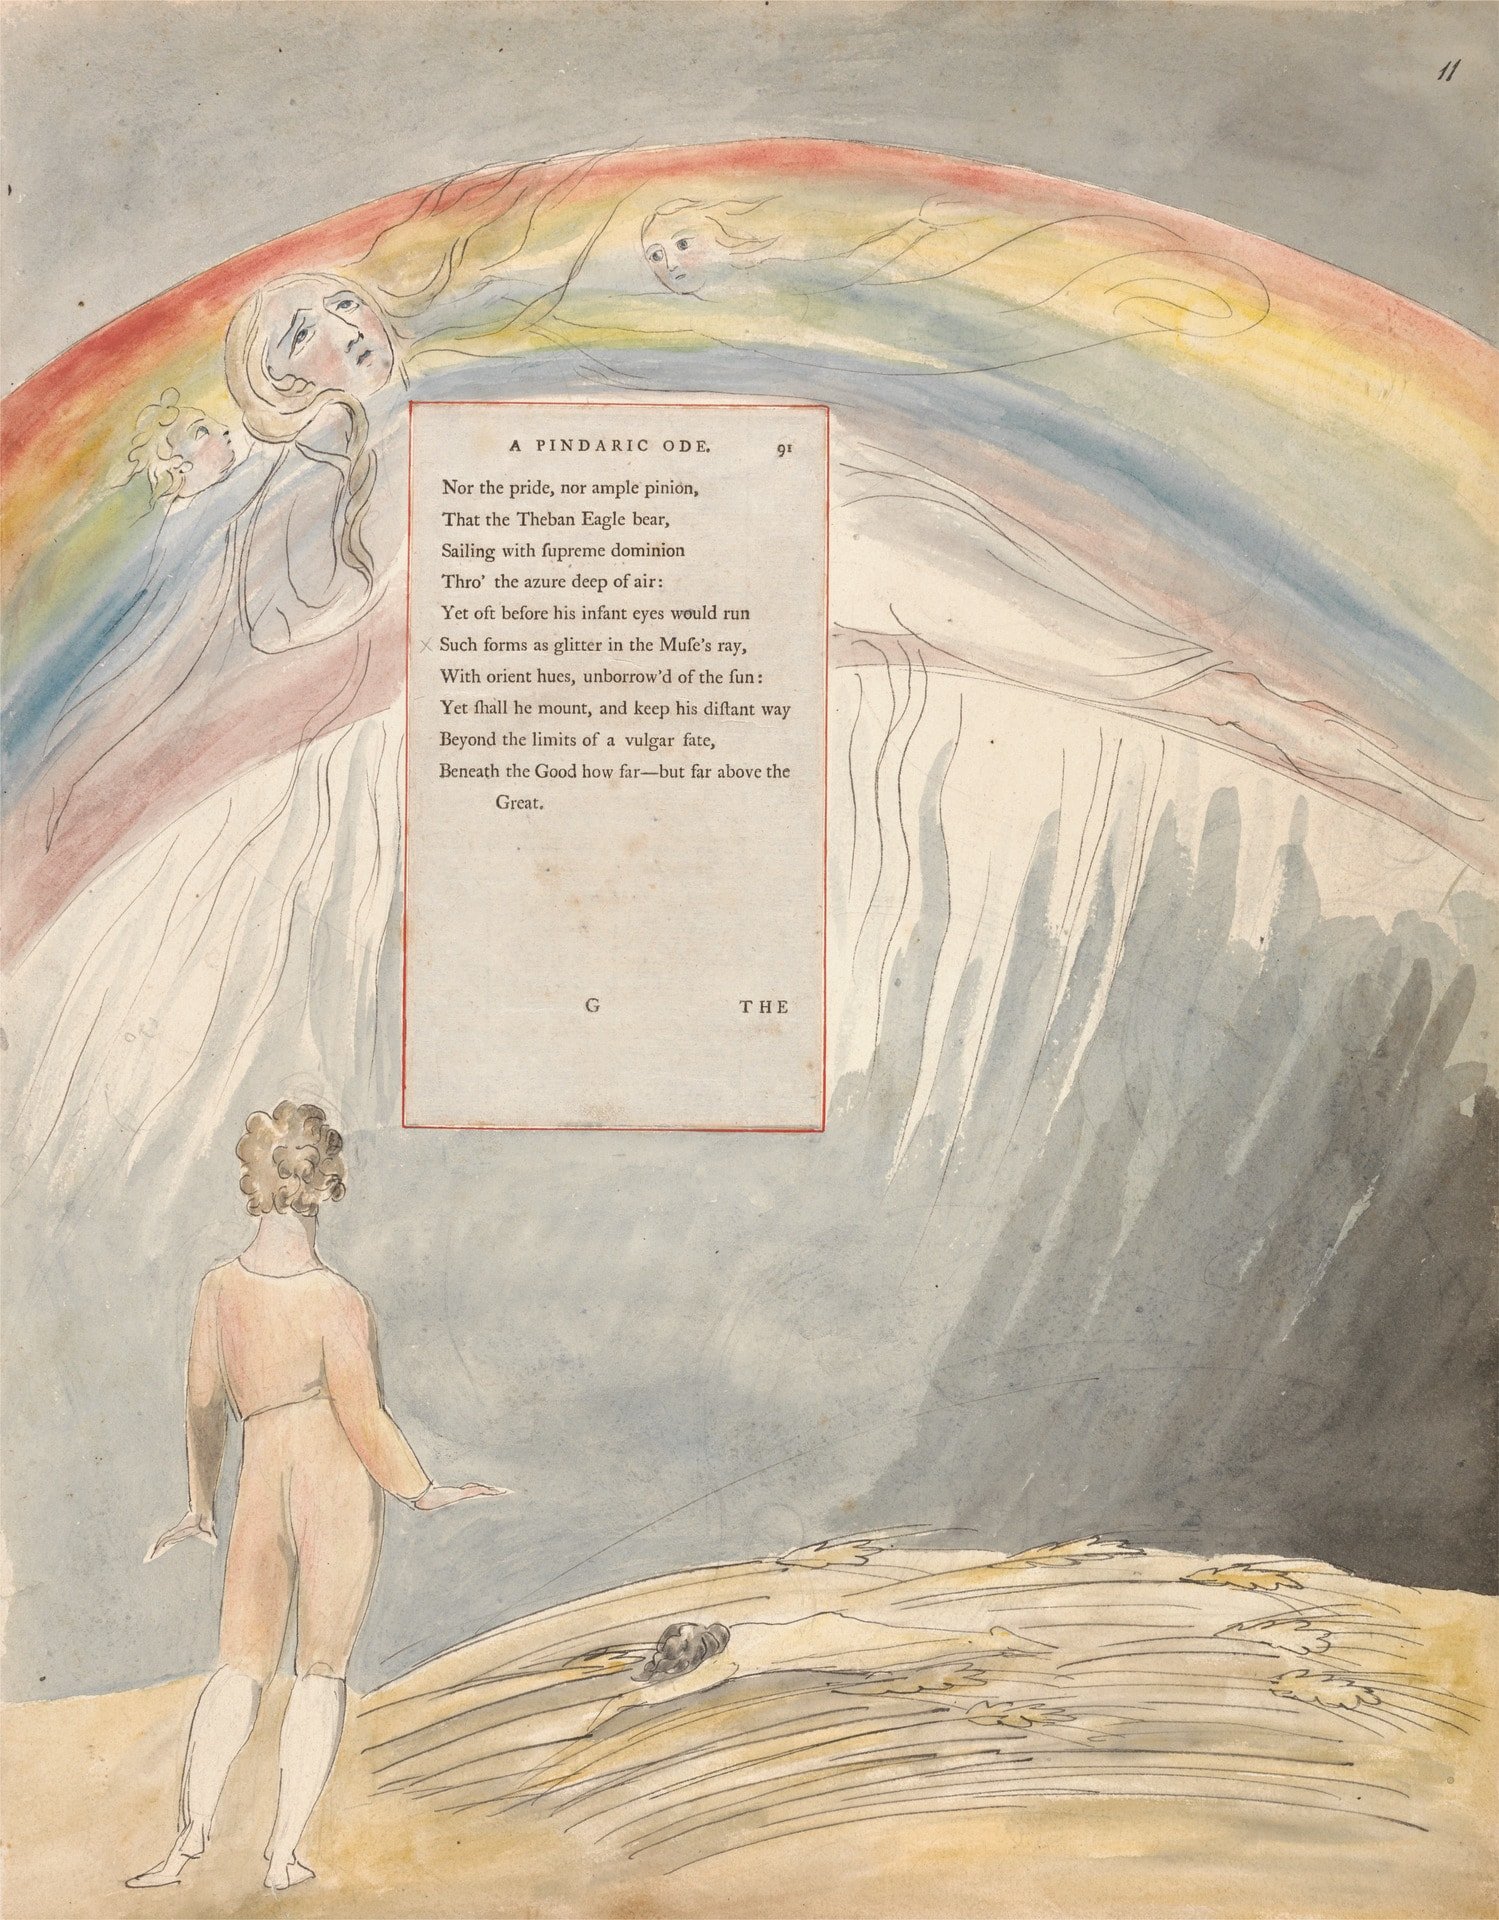 Poem by William Blake and rainbow illustration in background.